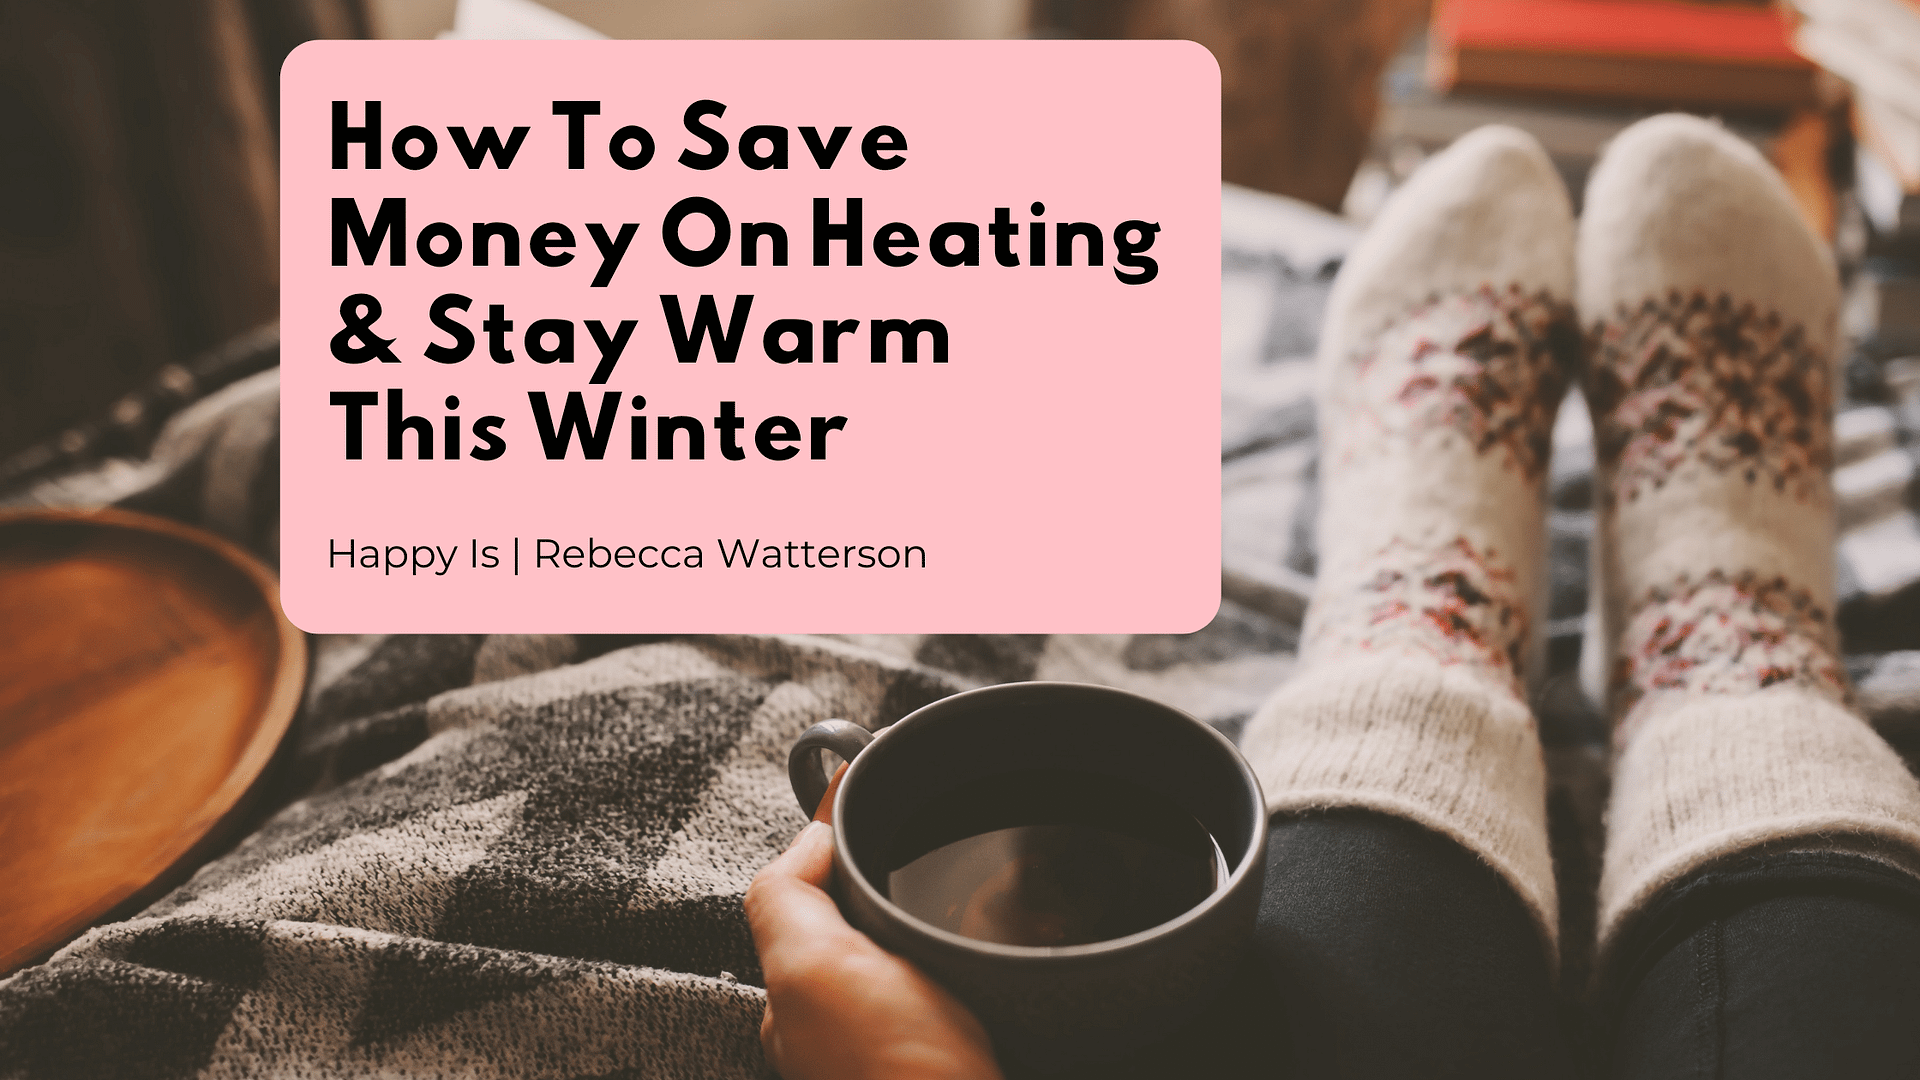 20+ Ways To Save Money On Your Heating and Stay Warm This Winter